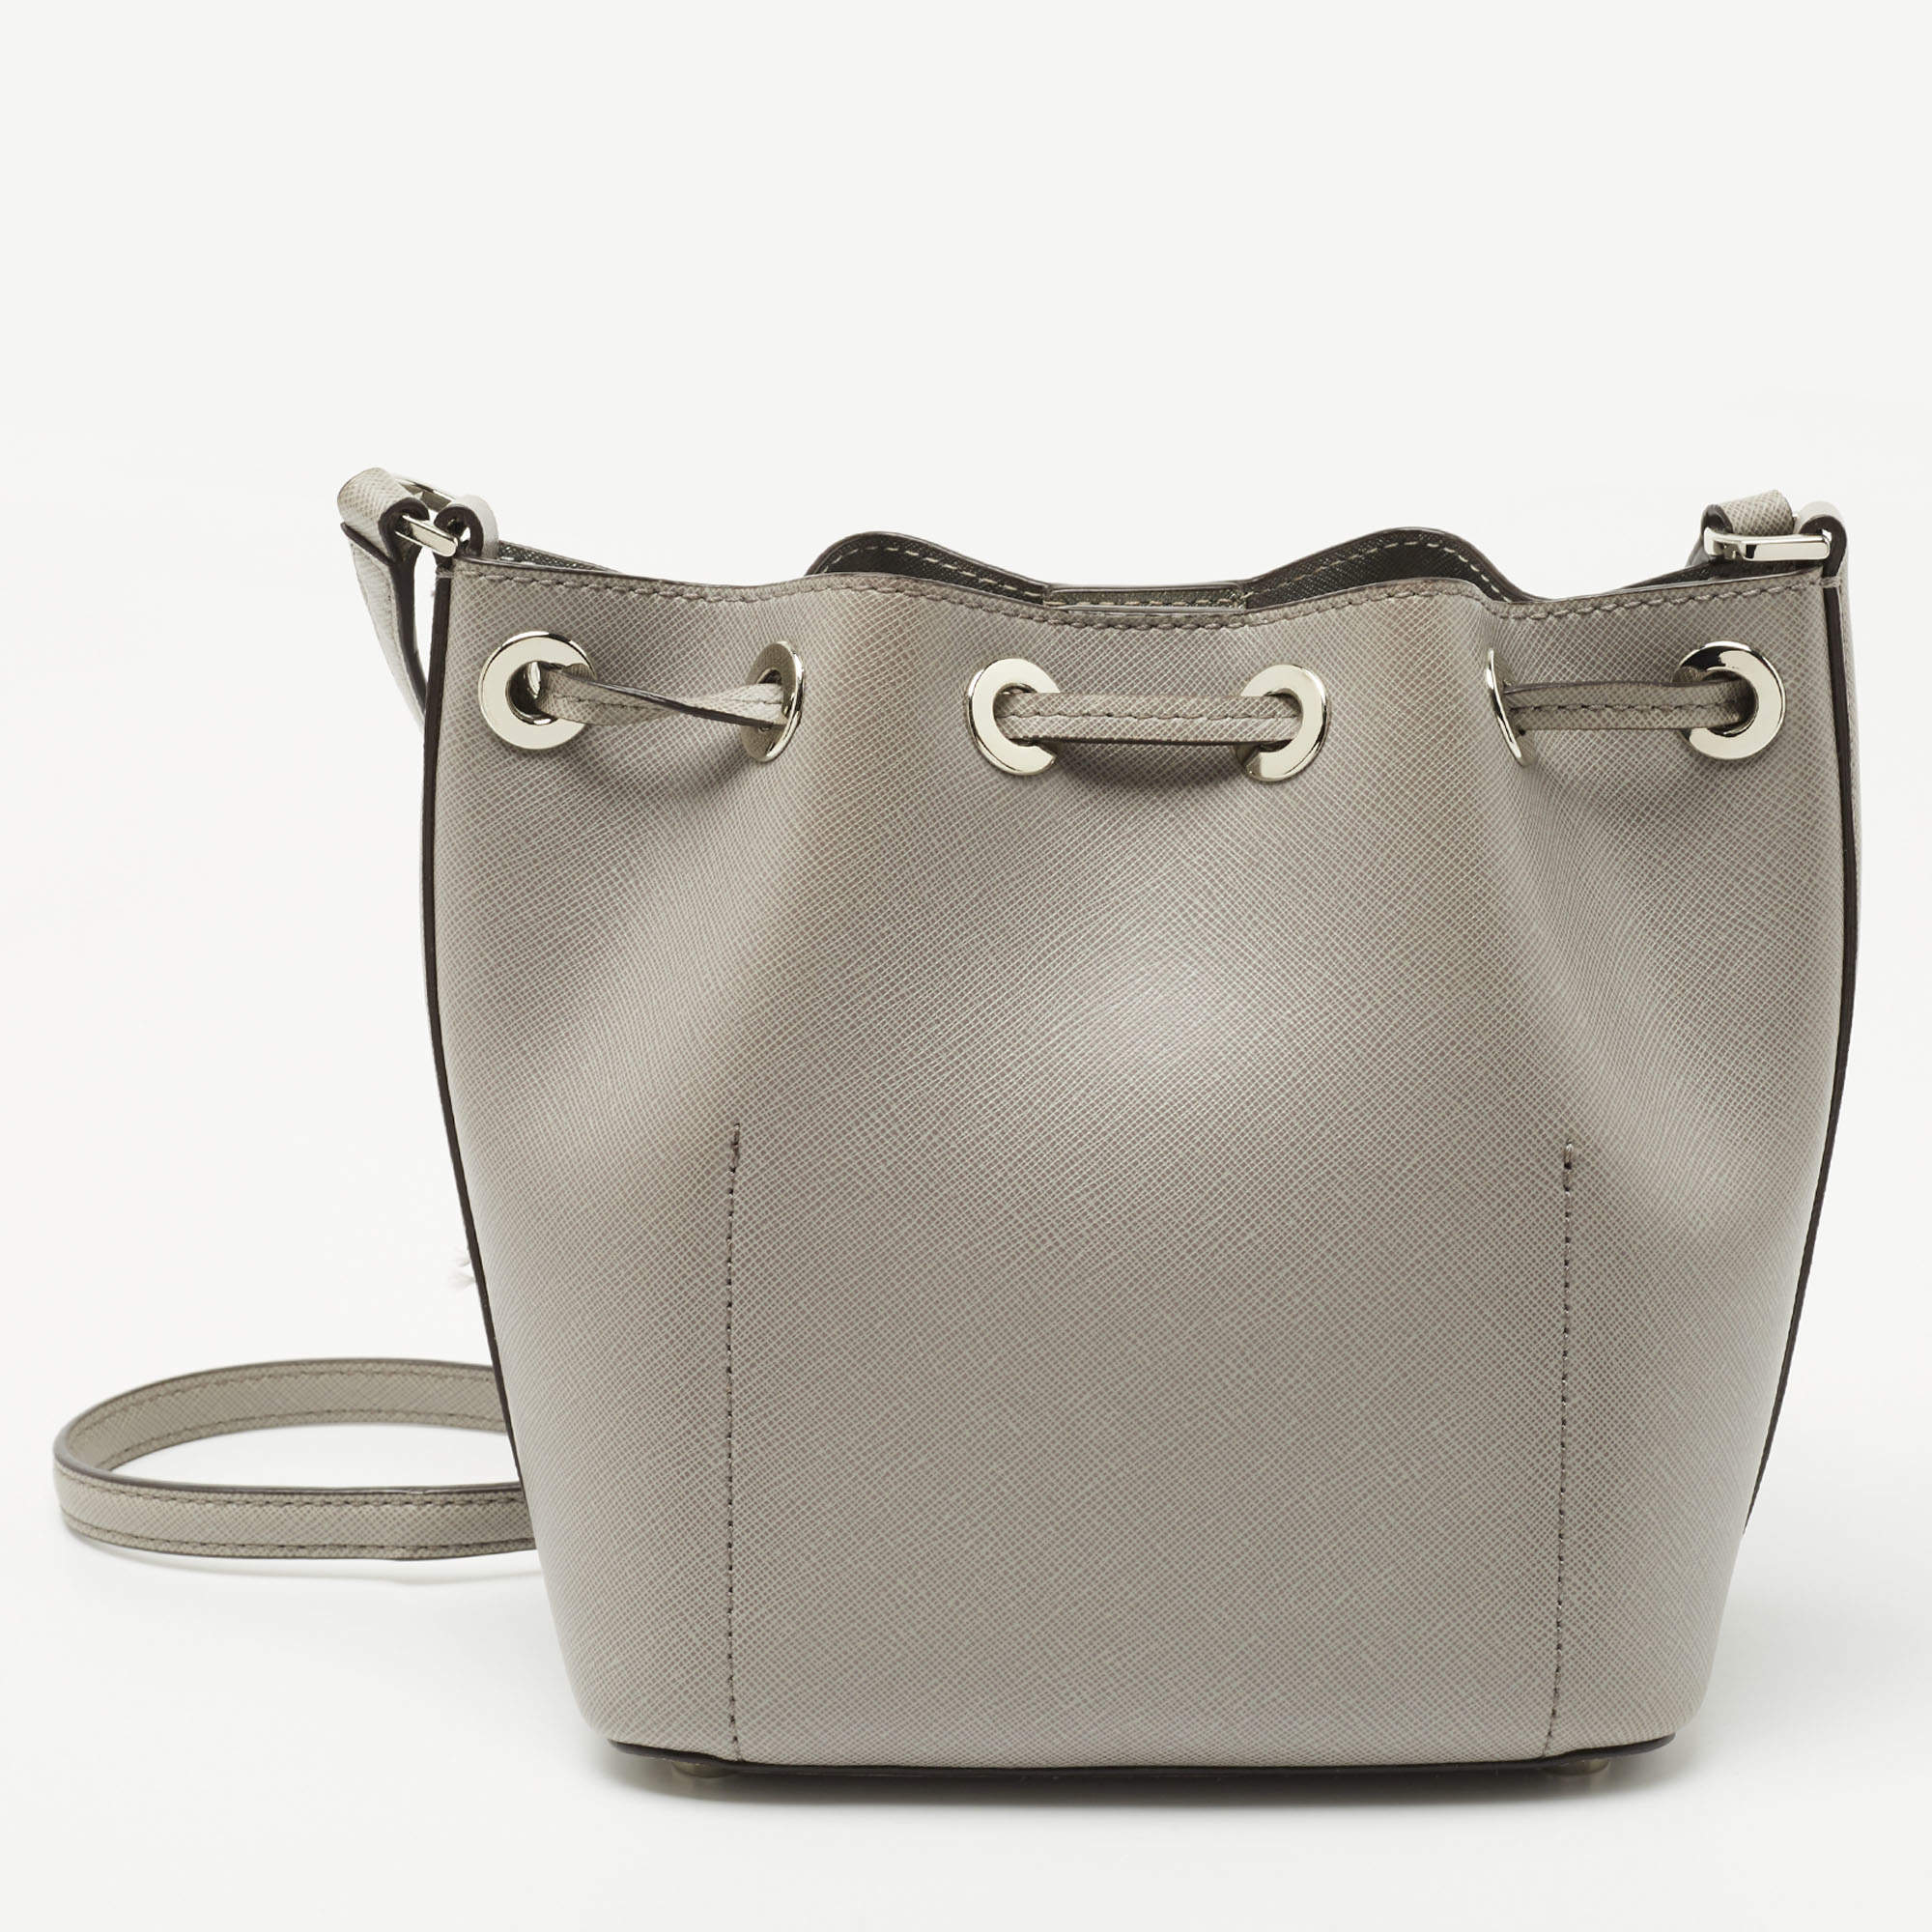 Michael Kors Brown & Peanut Greenwich Small Saffiano Leather Bucket Bag, Best Price and Reviews